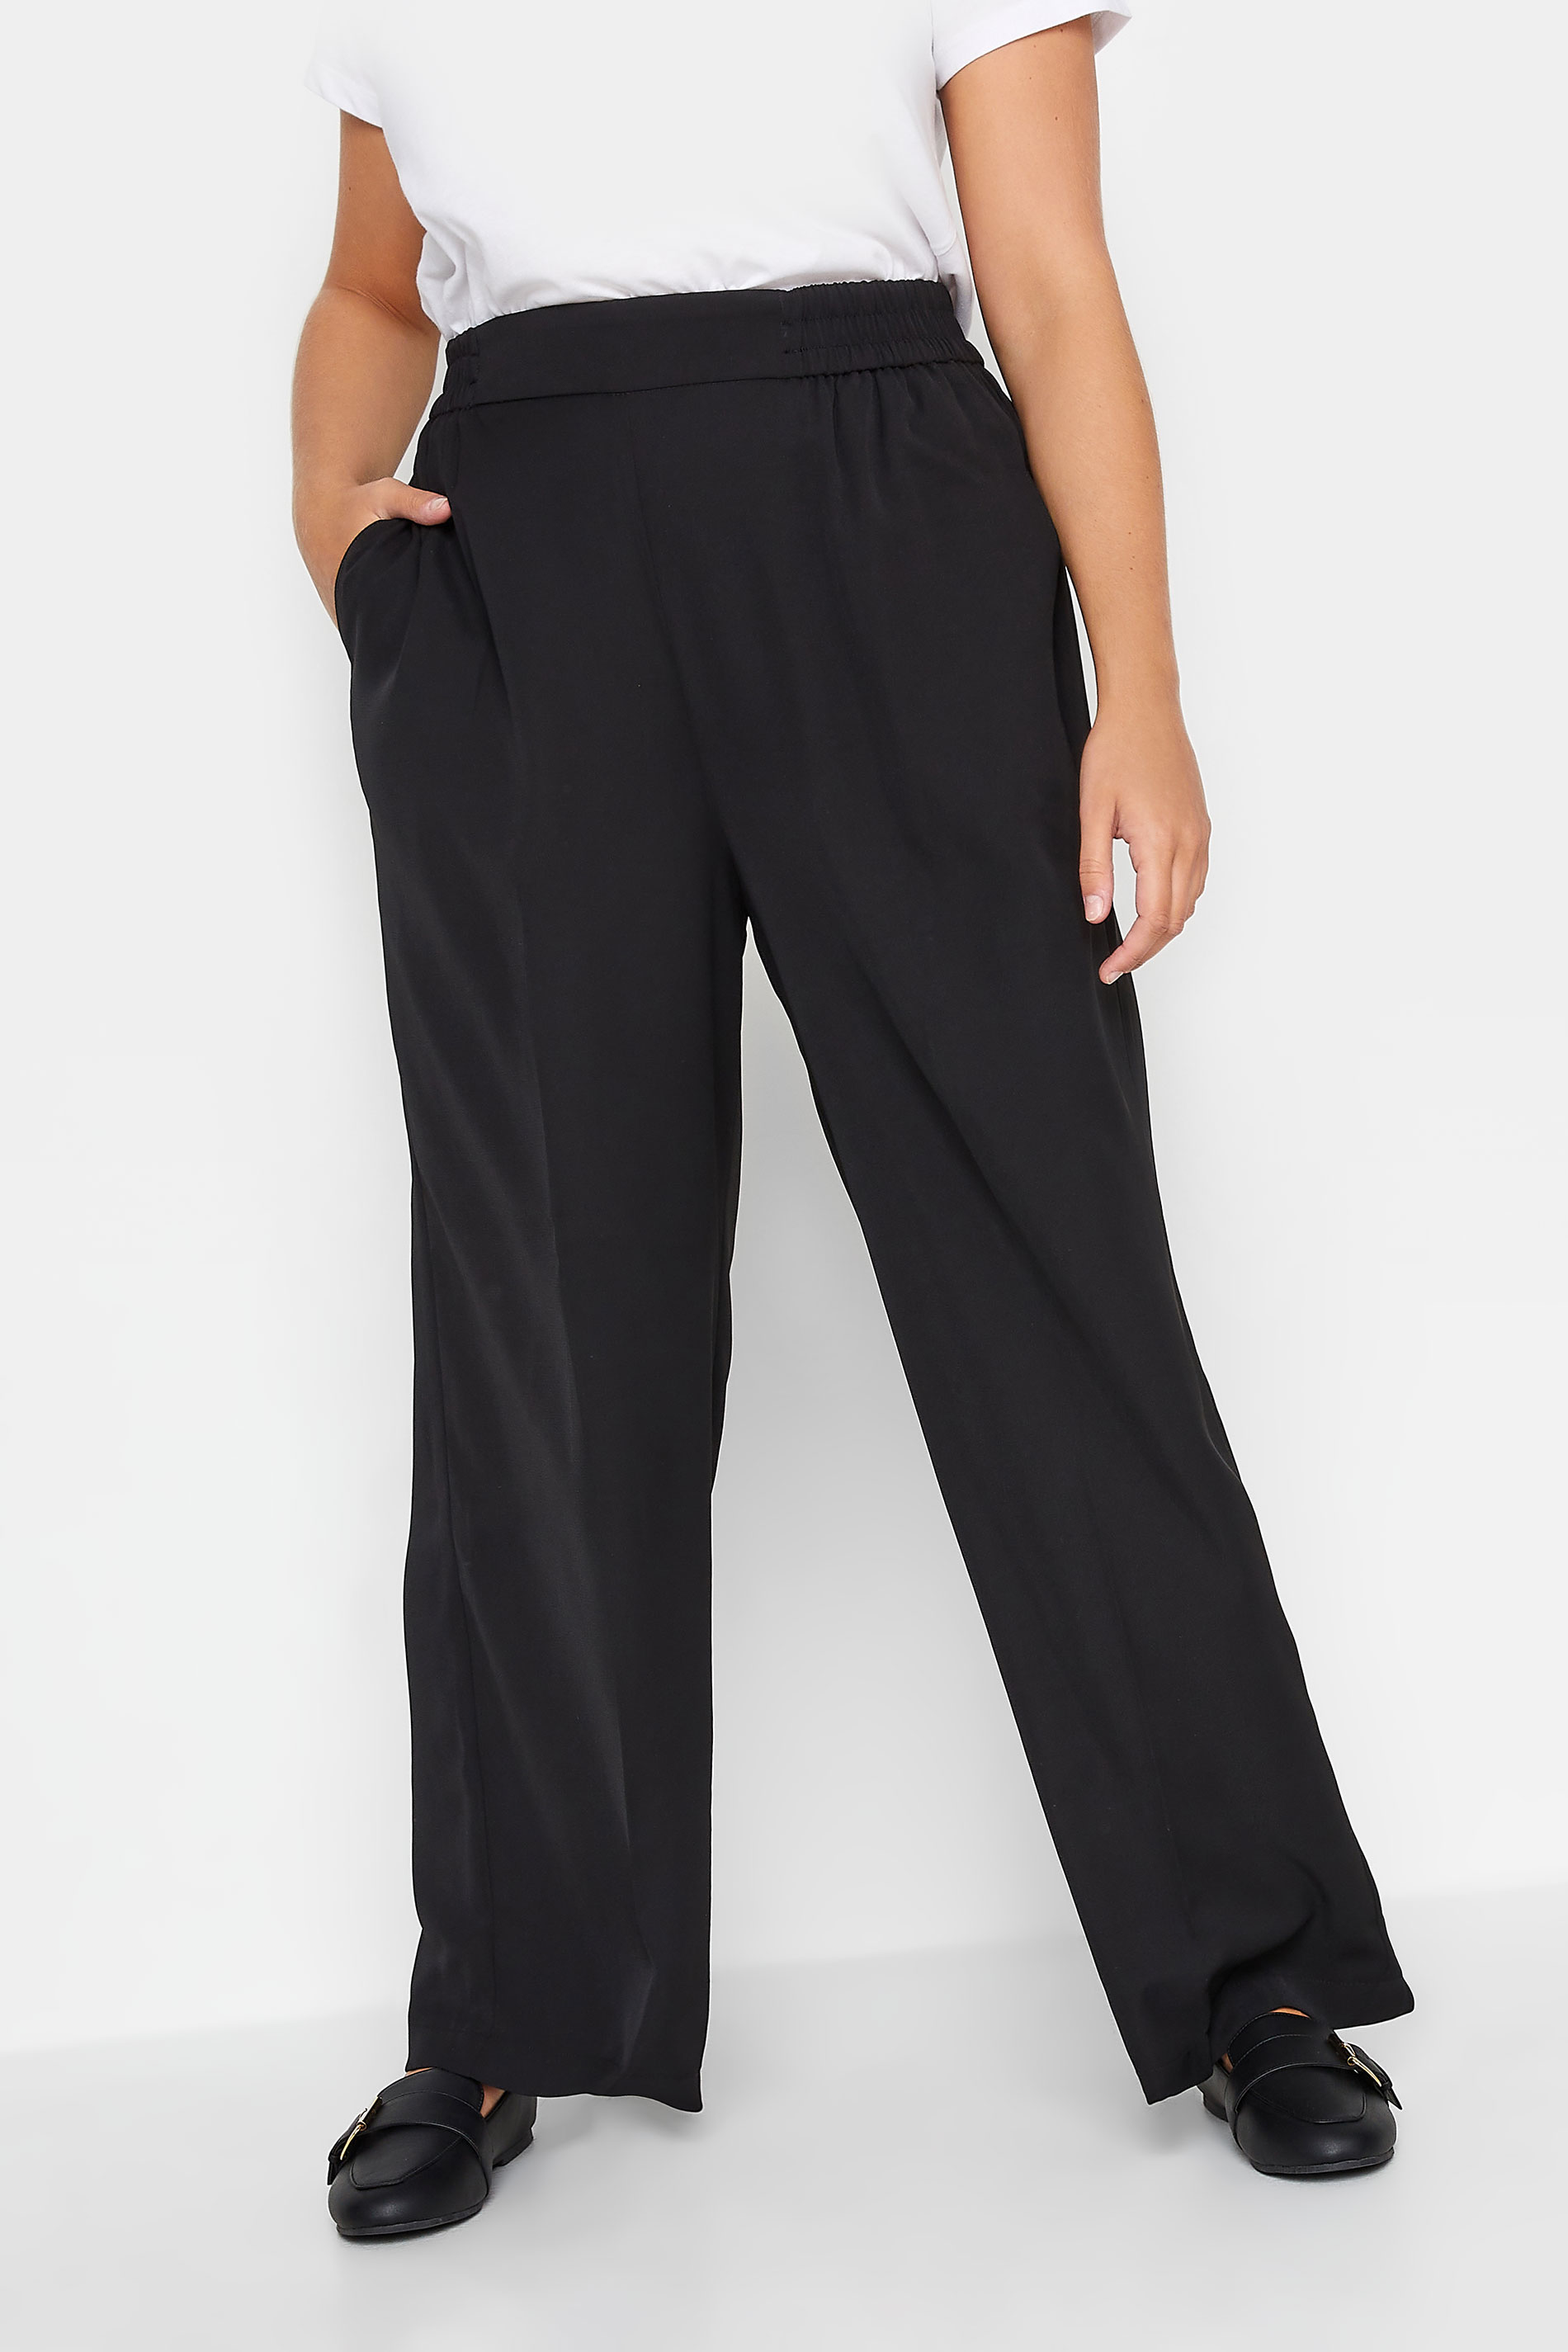 YOURS Plus Size Black Elasticated Waist Pull-On Wide Leg Trousers | Yours Clothing 1